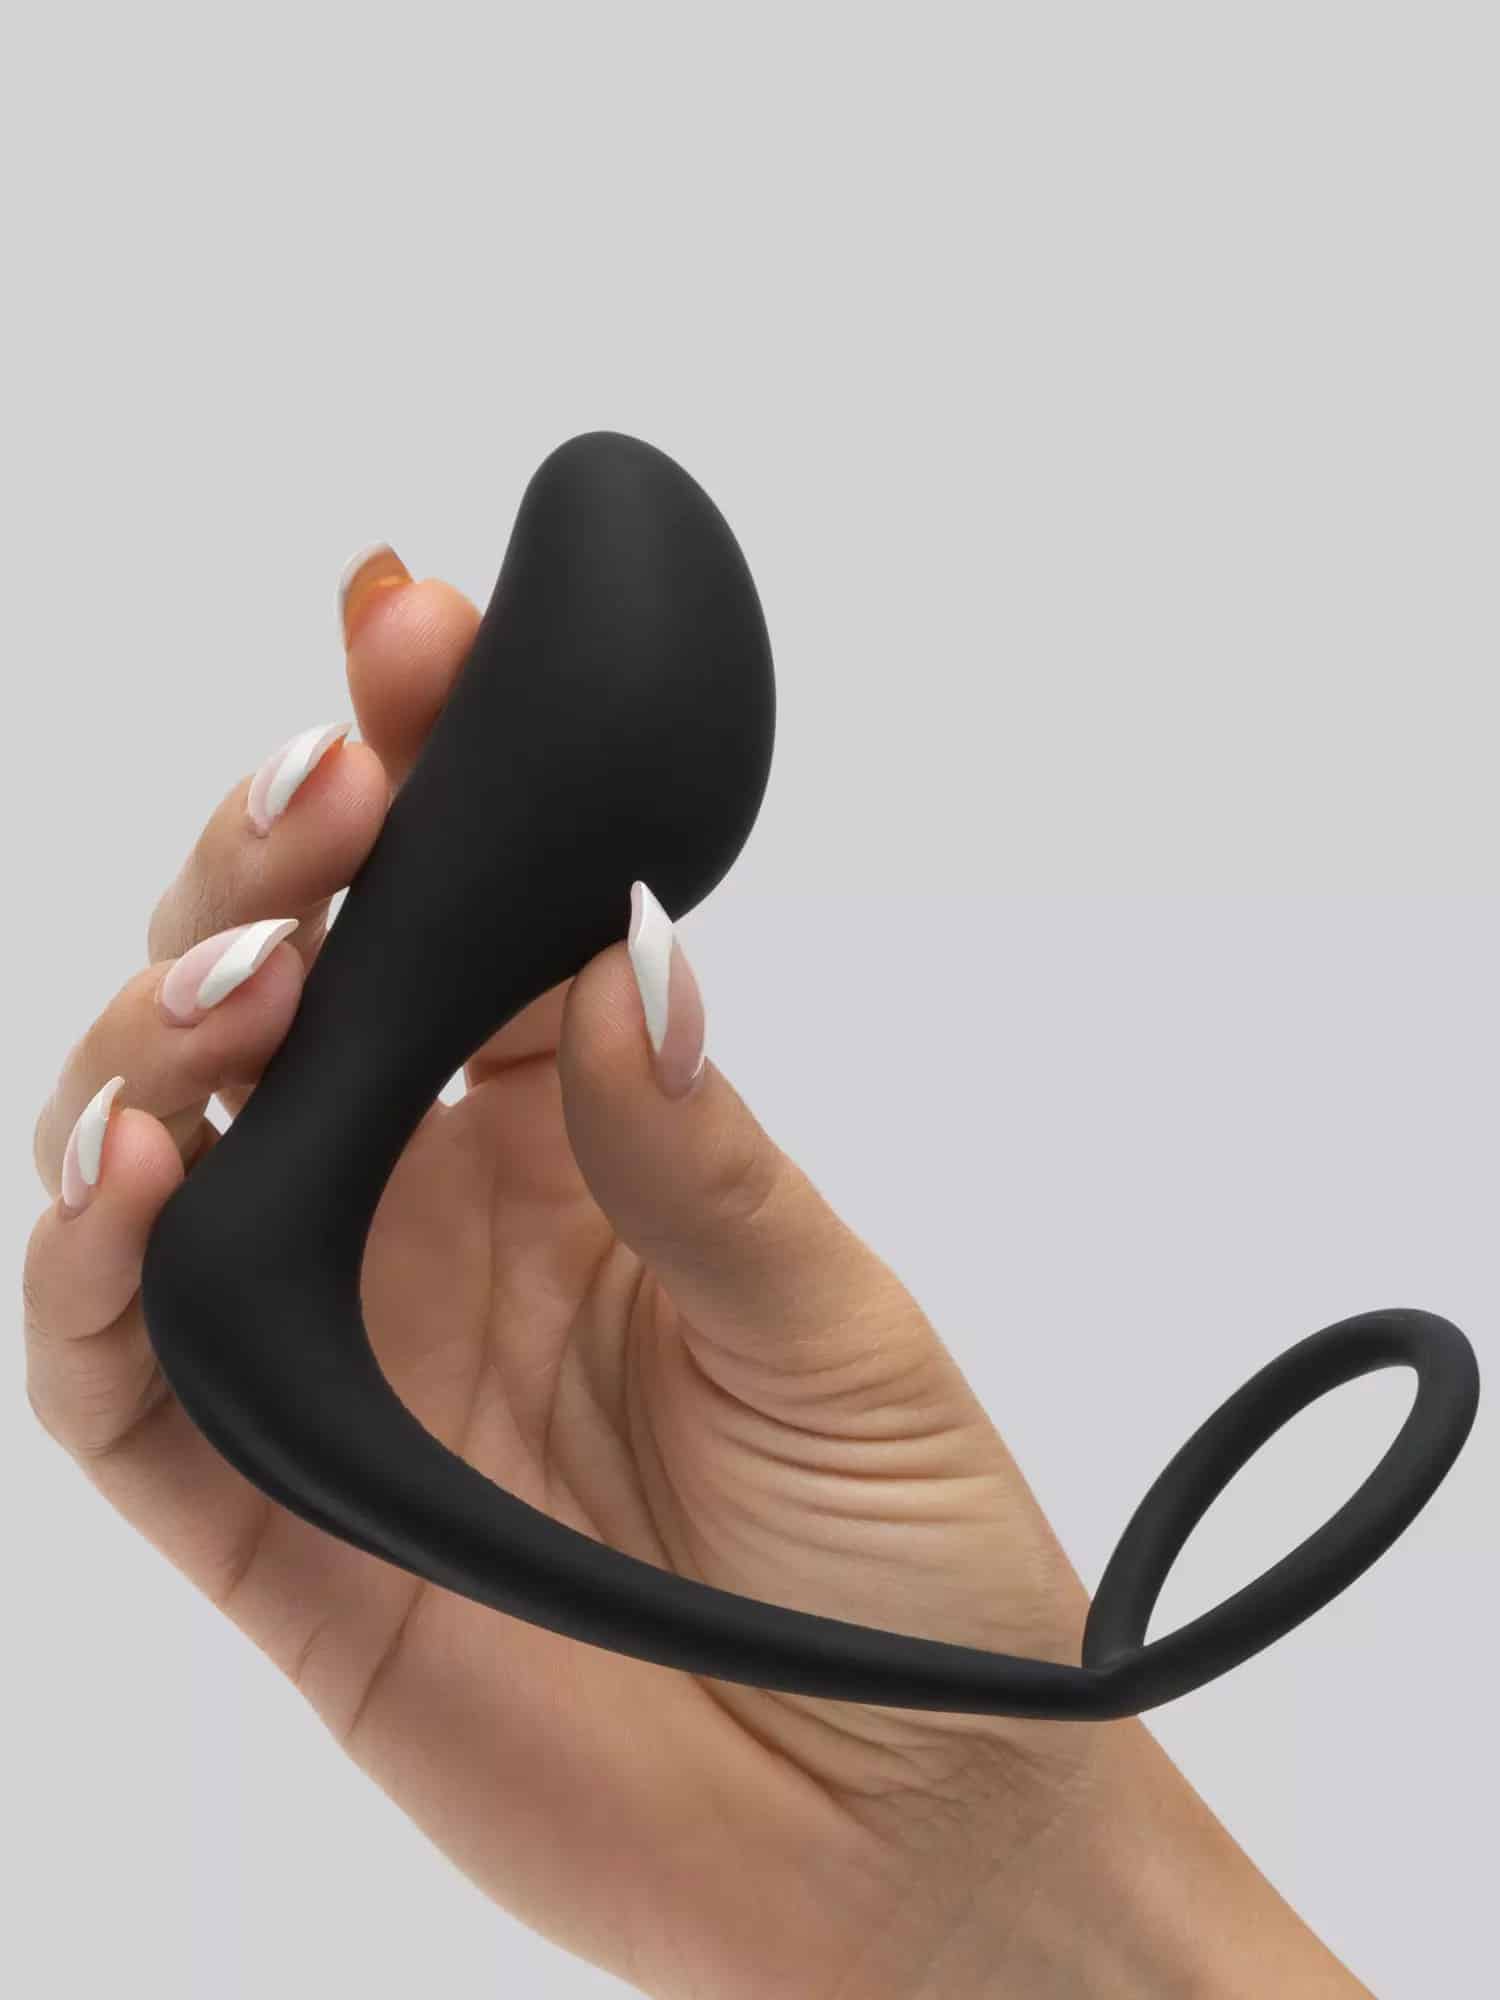 Lynk Plugged Cock Ring Prostate Massager. Slide 17